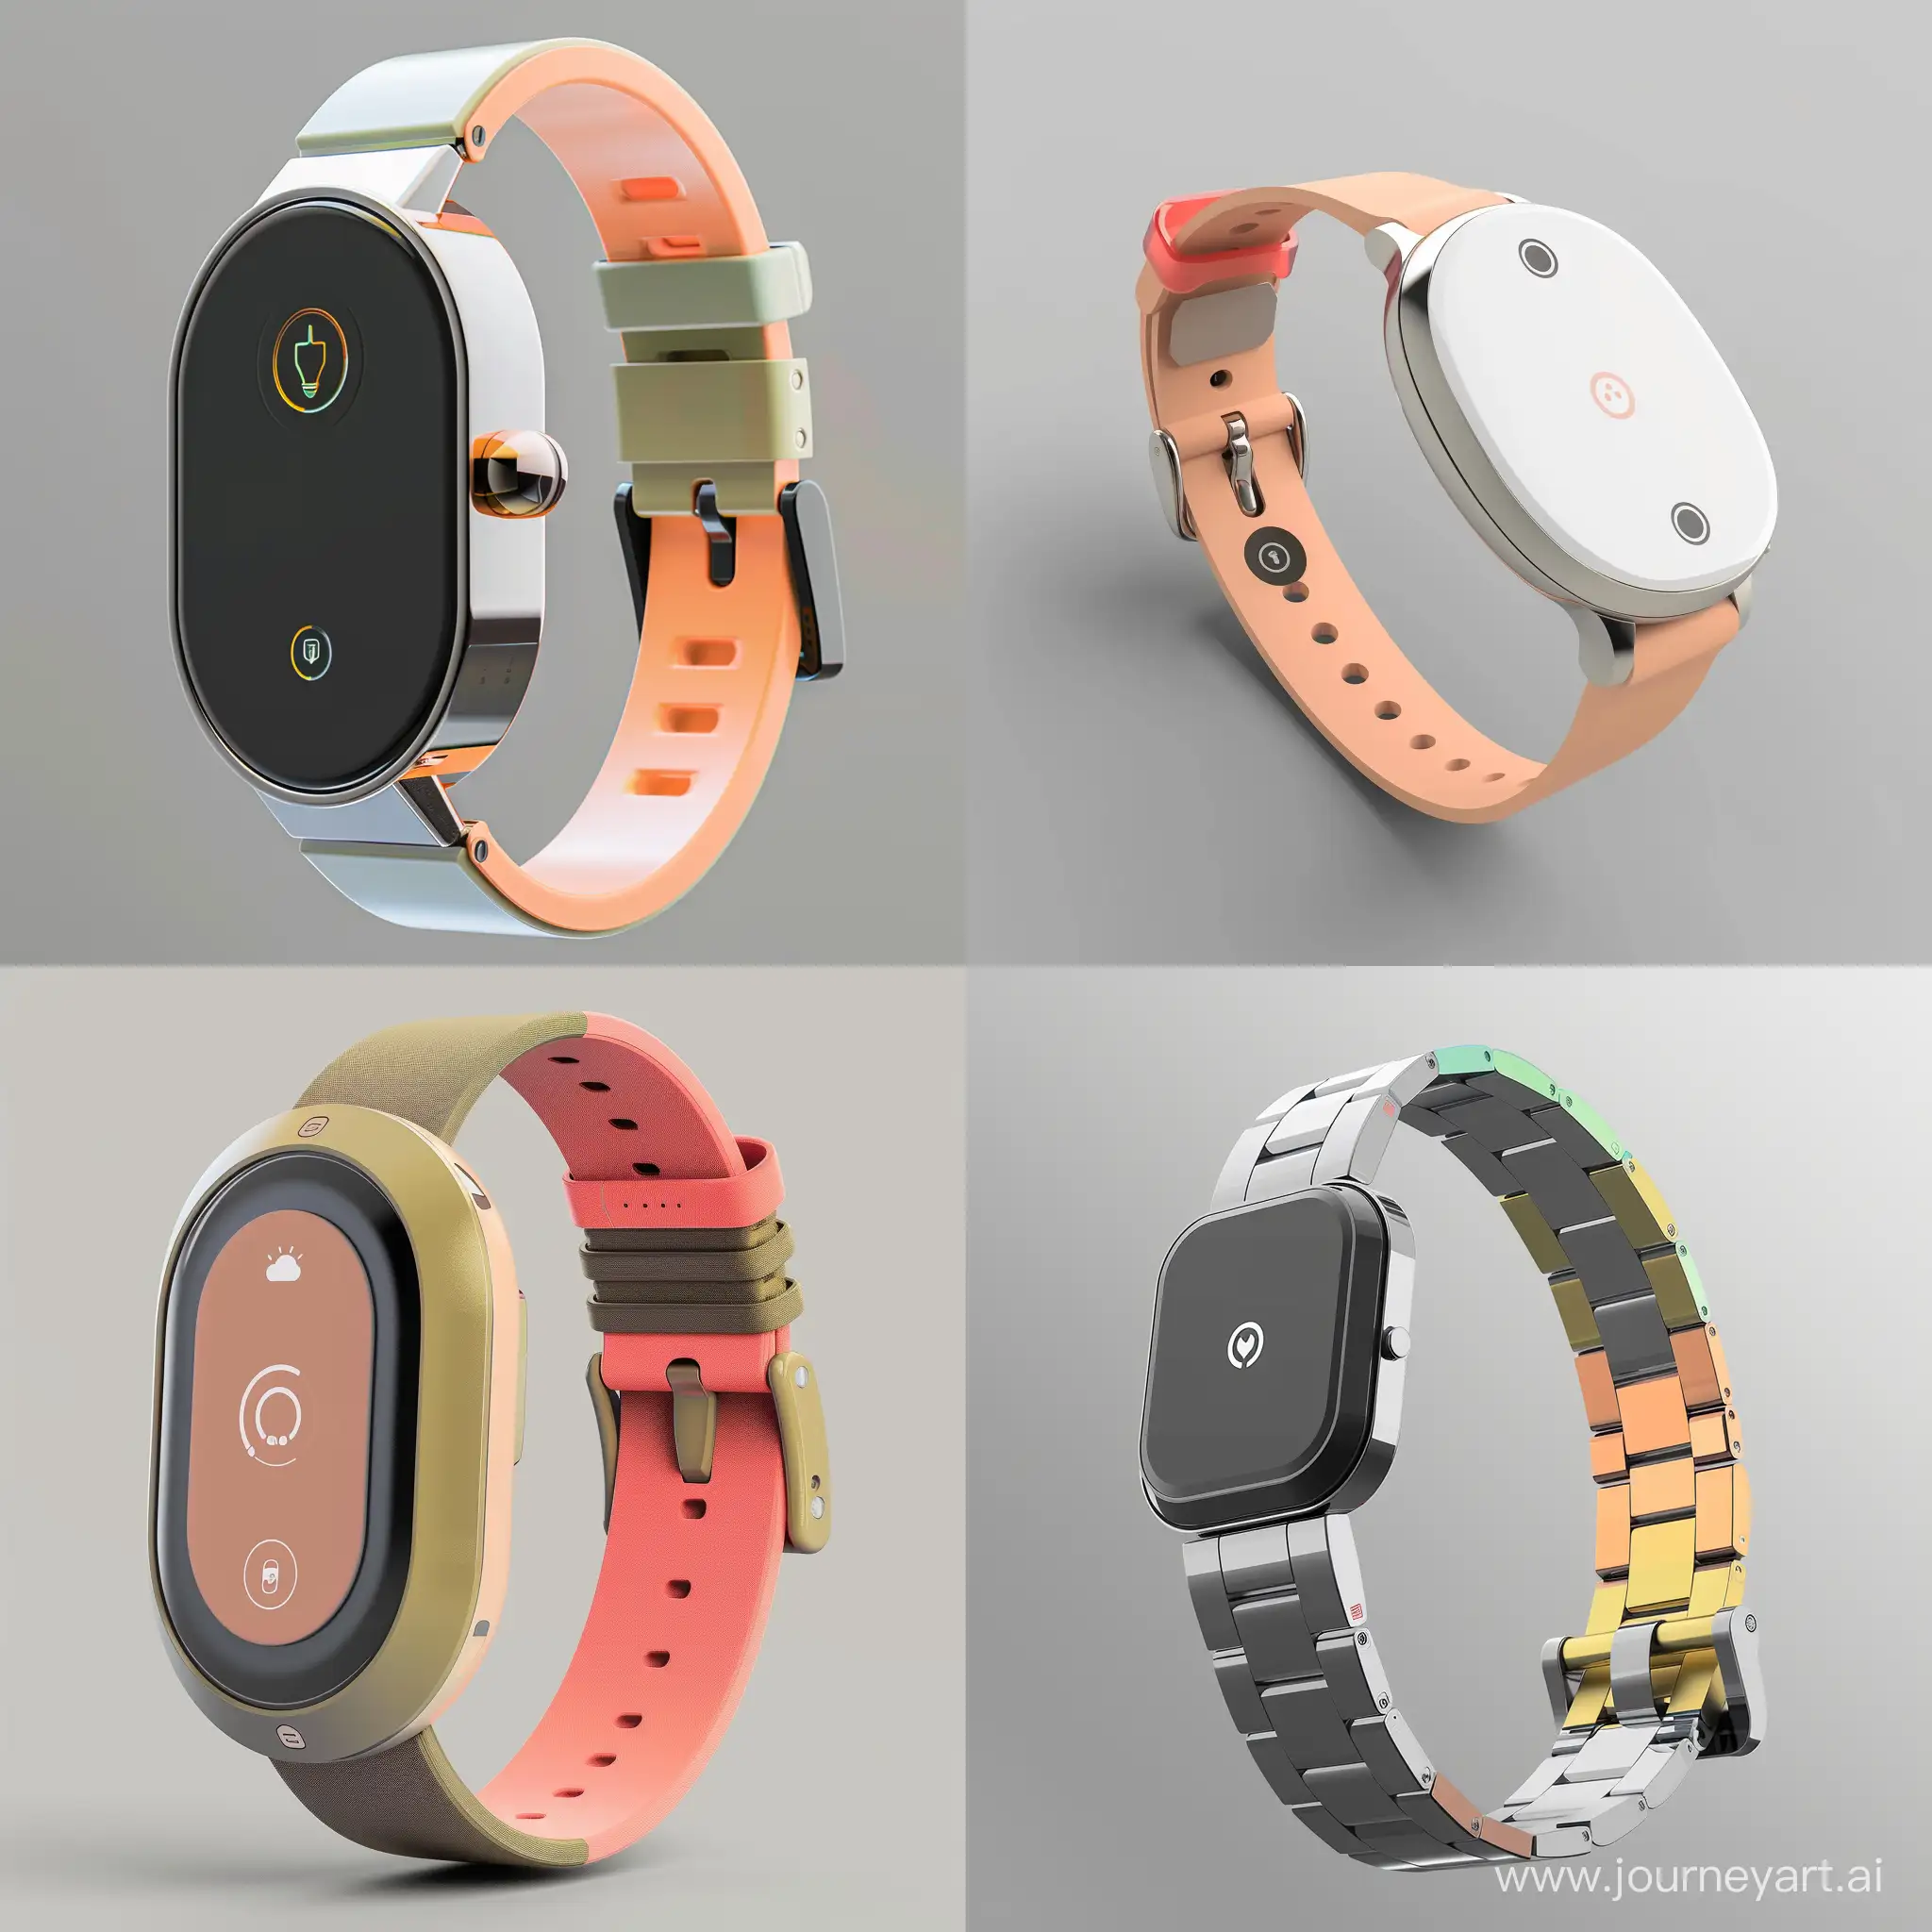 EcoFriendly-AIPowered-Smartwatch-for-Personal-Energy-Management